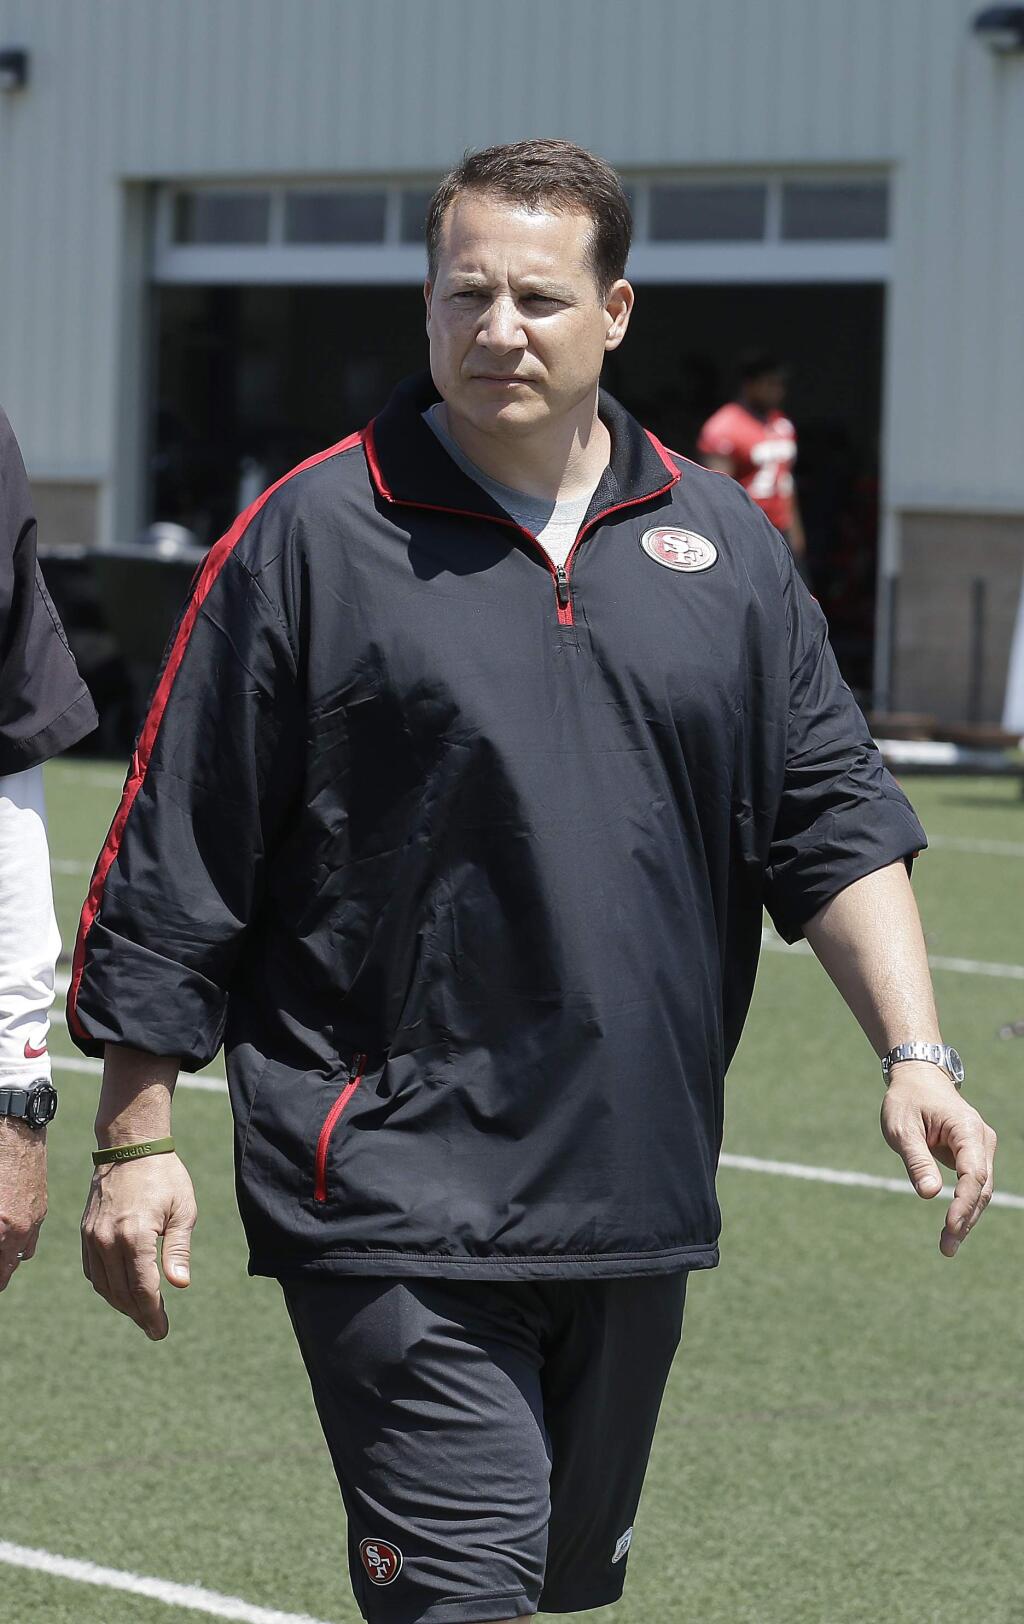 San Francisco 49ers offensive consultant Eric Mangini walks off the field after practice at an NFL football training camp in Santa Clara, Tuesday, June 4, 2013. (AP Photo/Jeff Chiu)